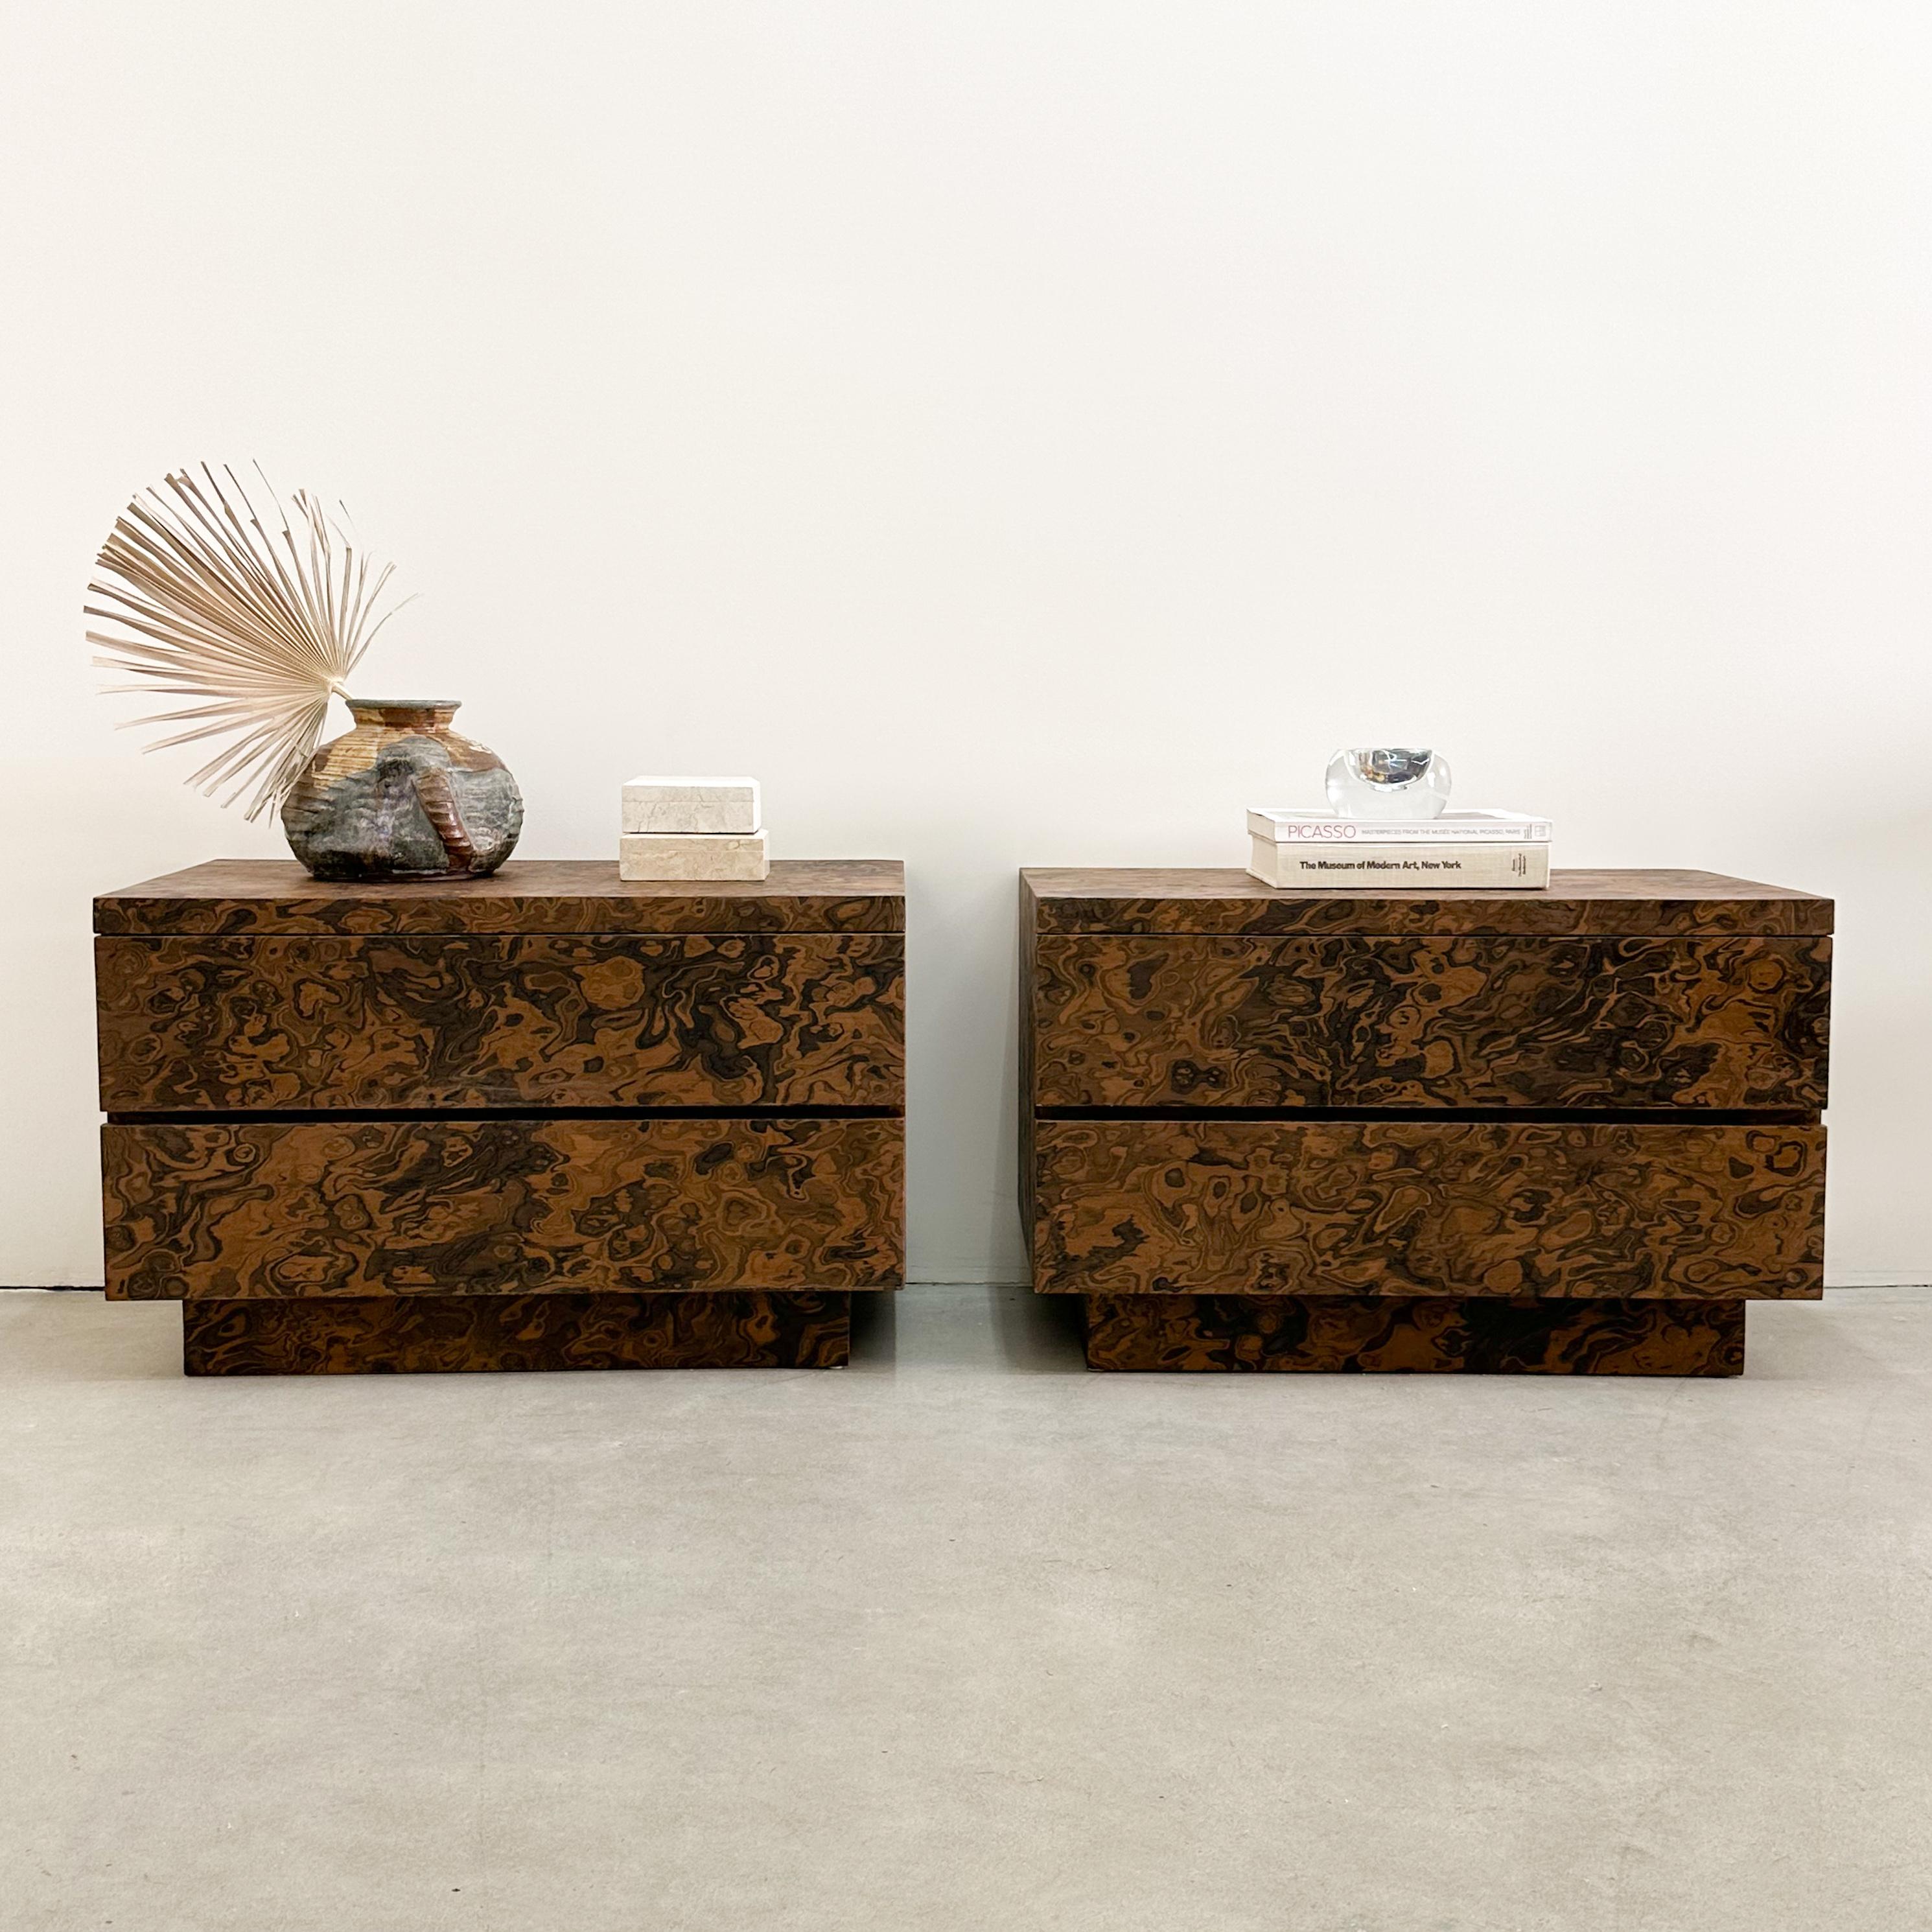 Pair of Vintage Burlwood Veneer Nightstands.

The vintage nightstands have been meticulously re-veneered with burlwood manufactured by ALPI and have been carefully applied and sealed with a satin finish, enhancing their durability.

Color: Shades of